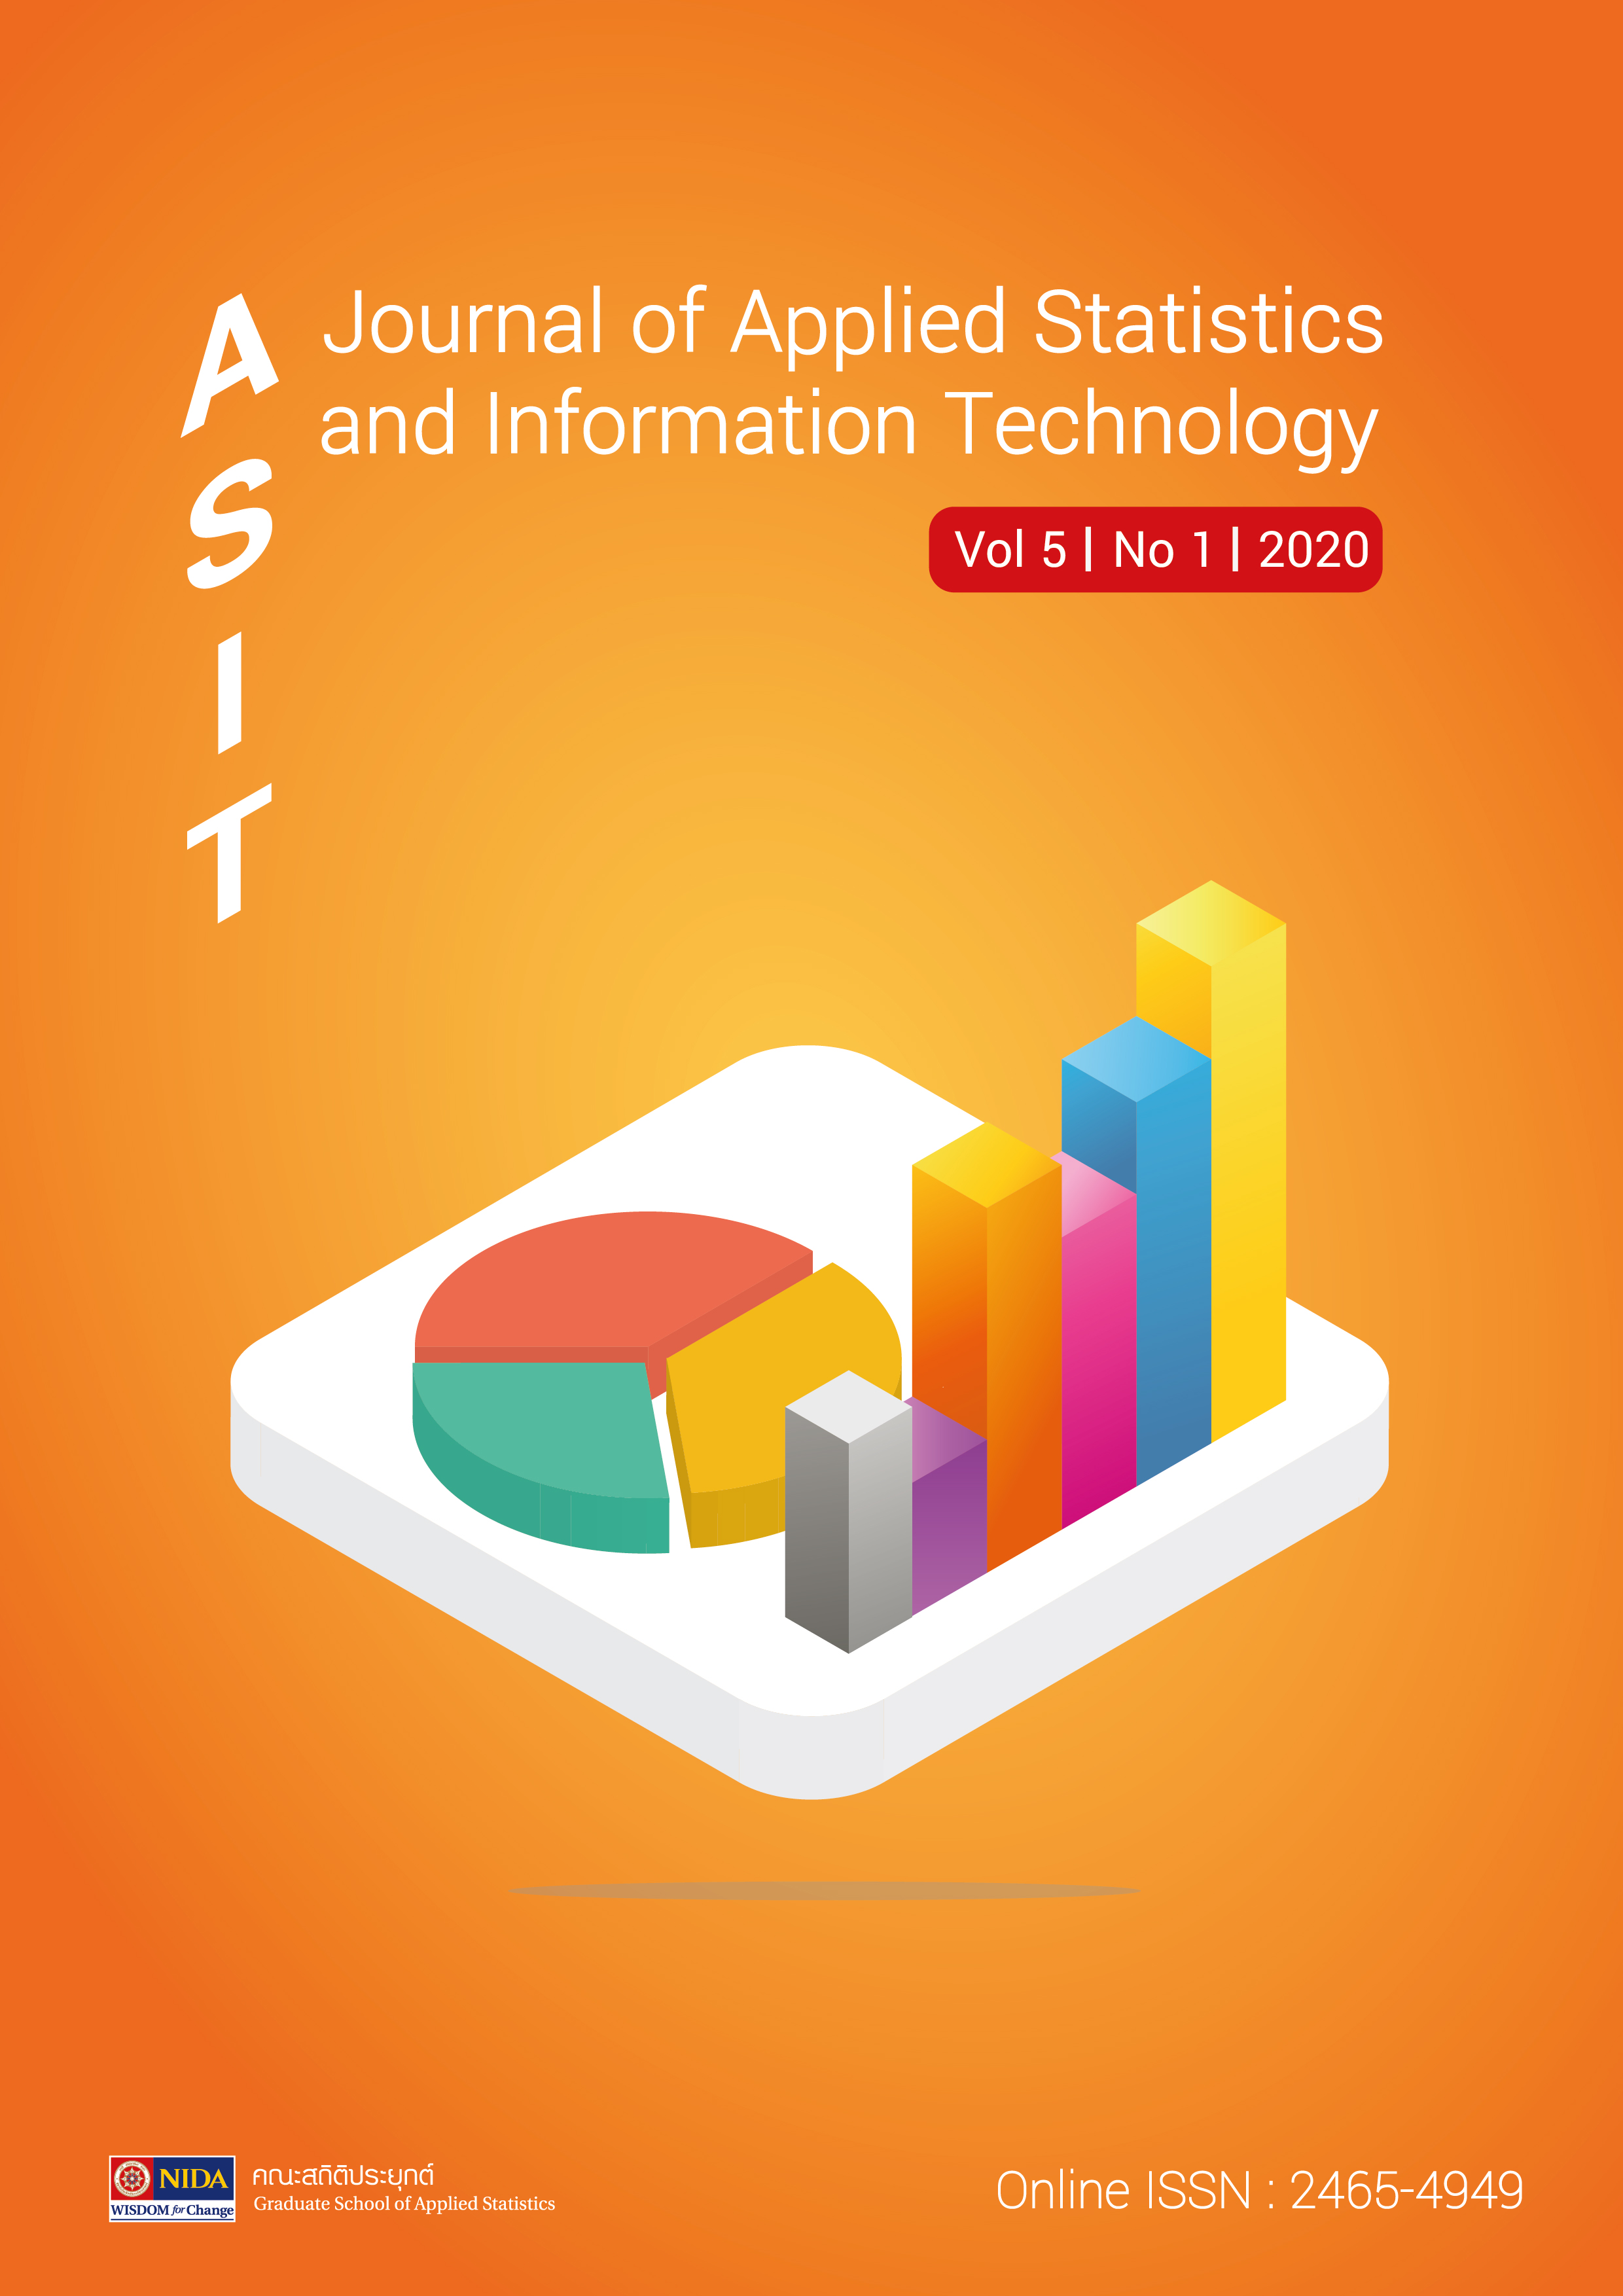 					View Vol. 5 No. 1 (2020): Journal of Applied Statistics and Information Technology Vol 5 No 1 (January - June 2020)
				